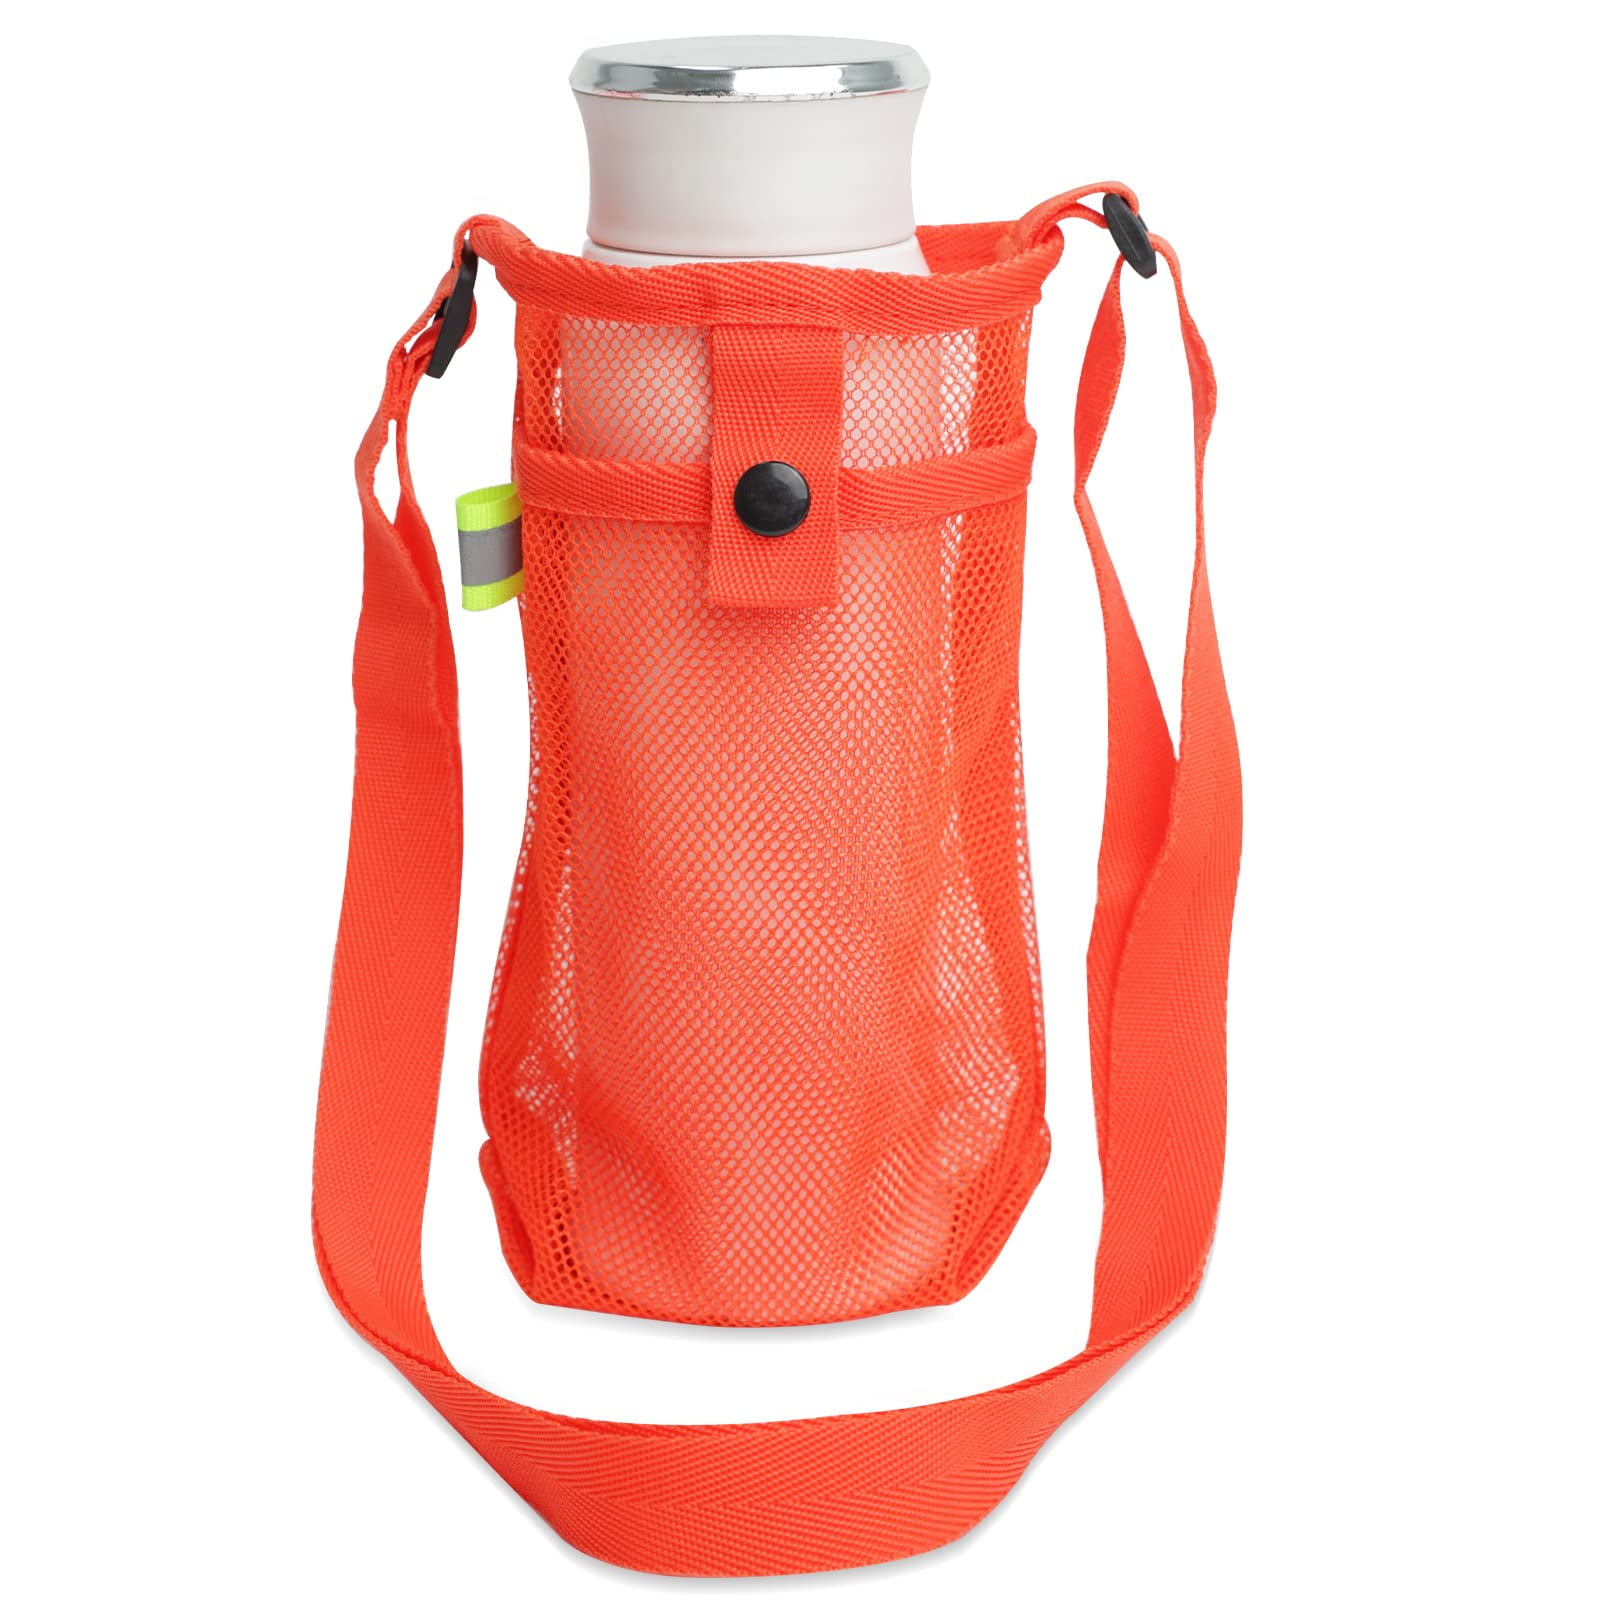  sunkey Water Bottle Carrier Holder Bag with Strap and